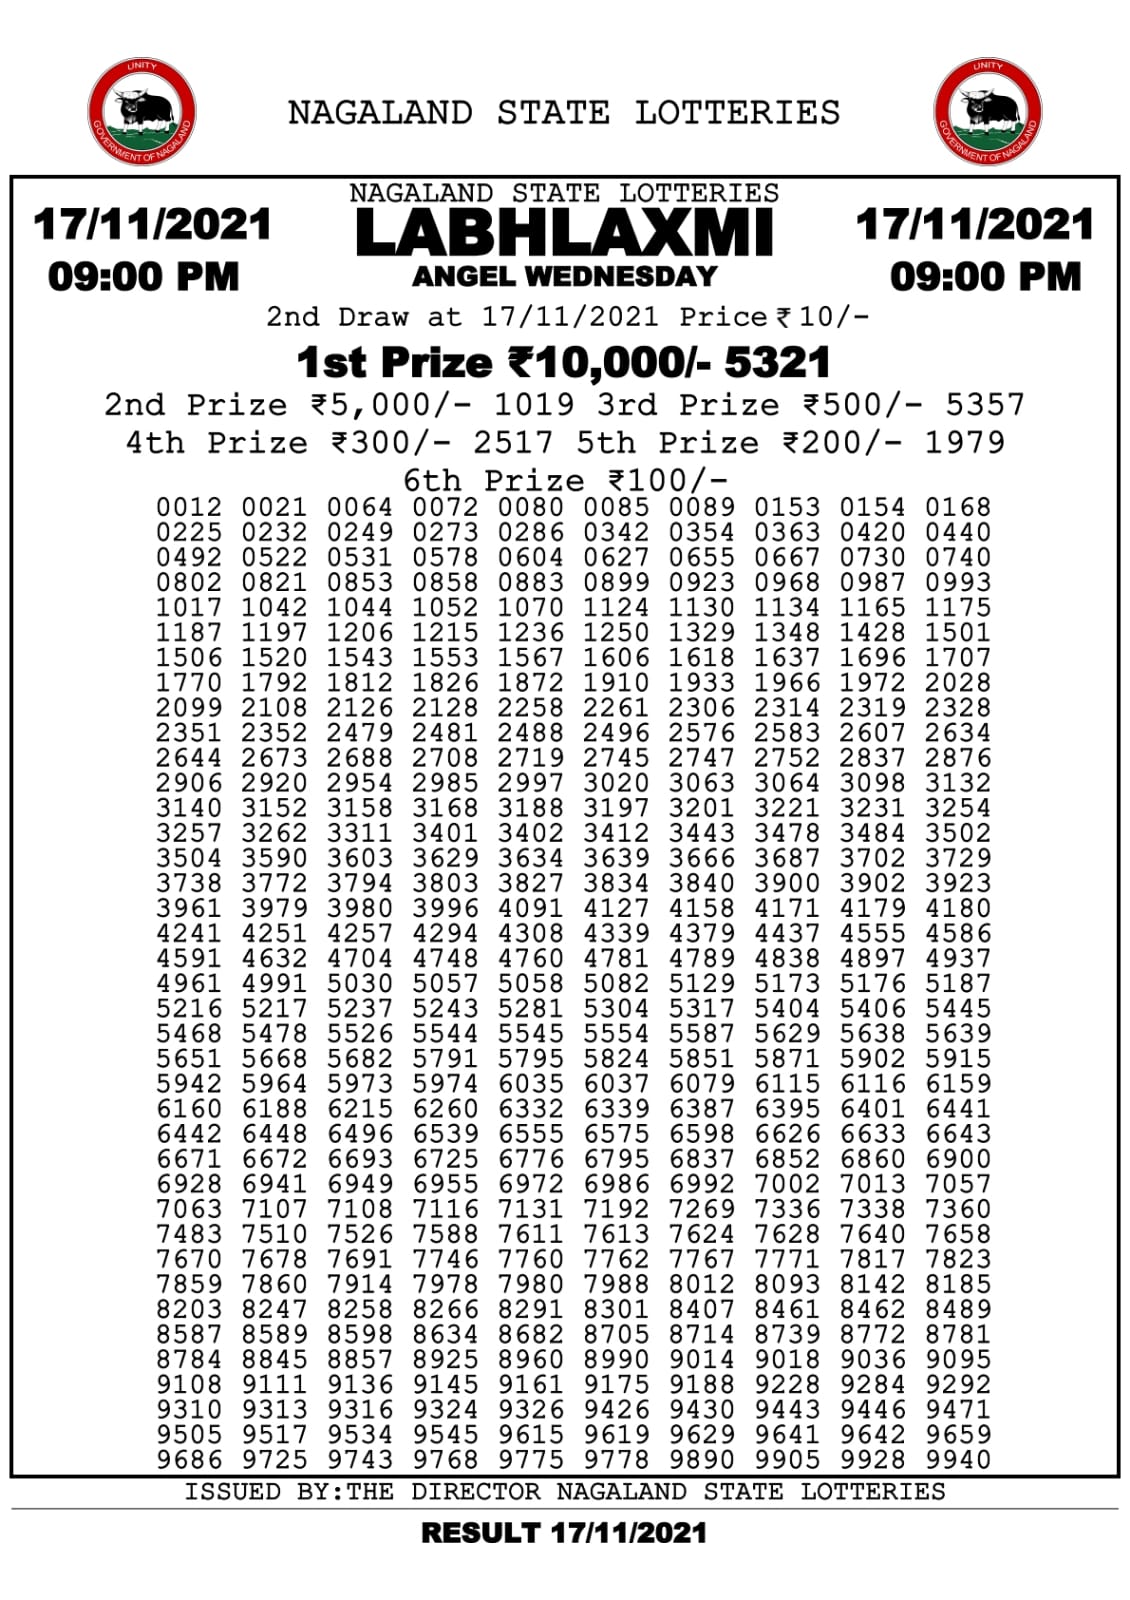 Labhlaxmi 9pm Lottery Result 17.11.2021